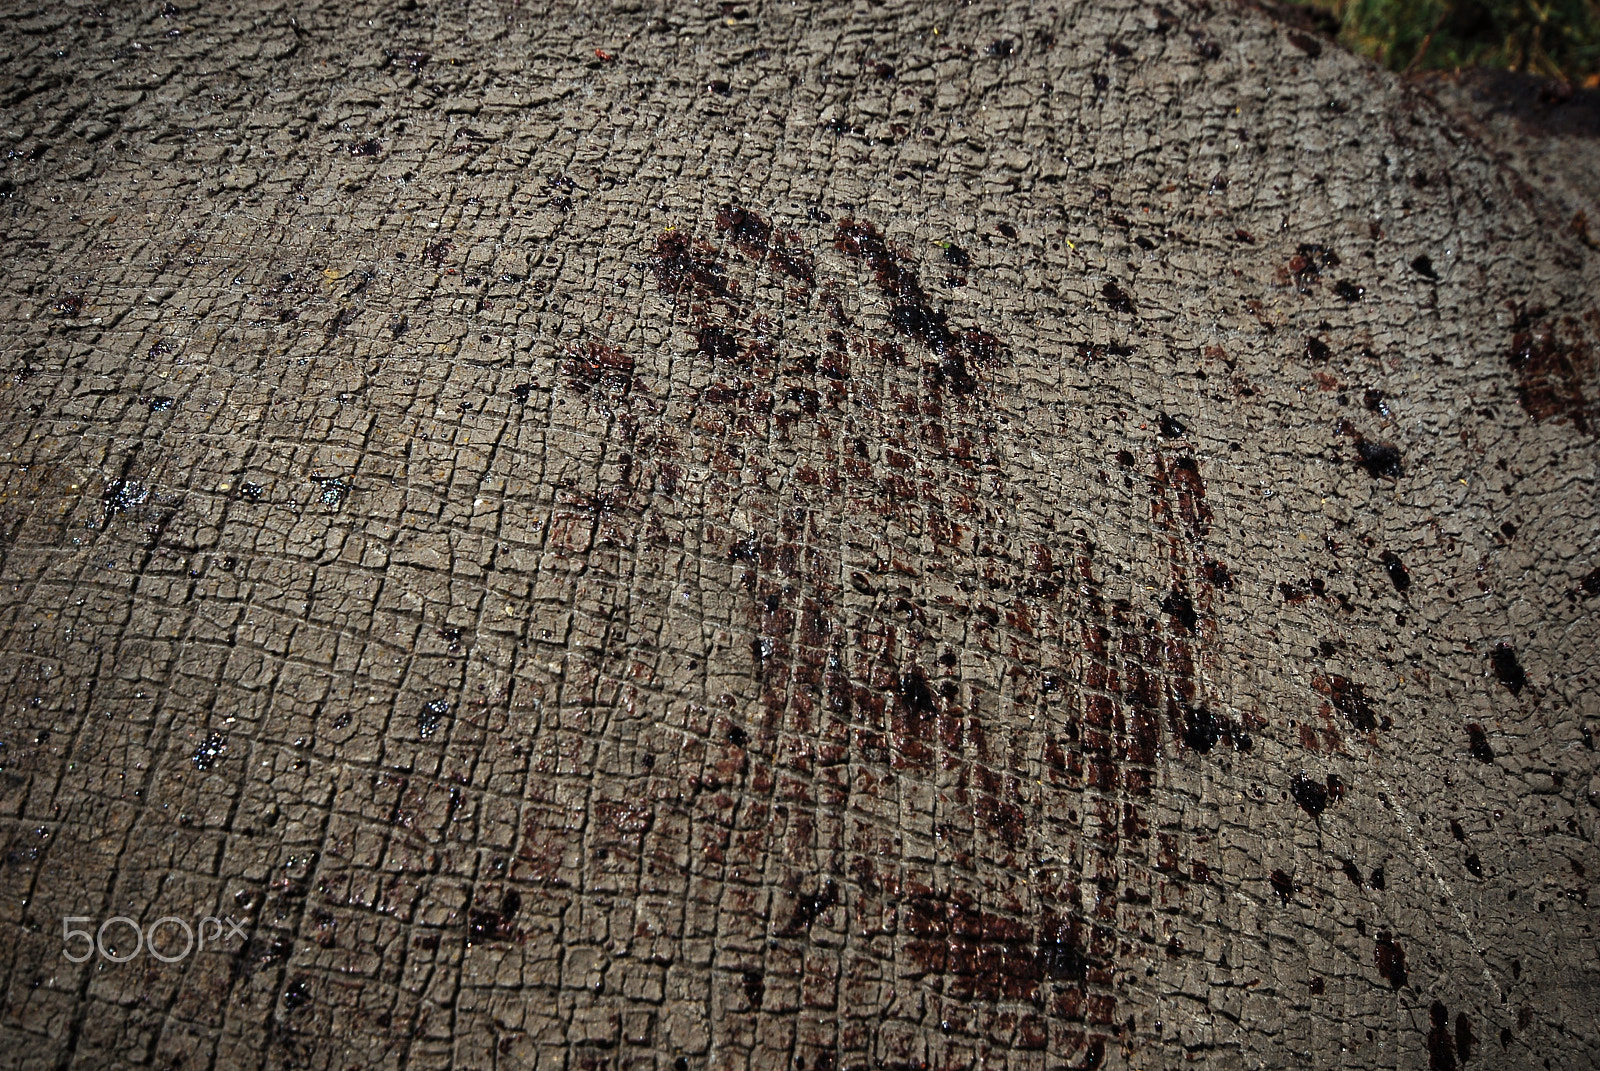 Nikon D200 sample photo. A poachers bloody hand on the body of a poached rhino photography